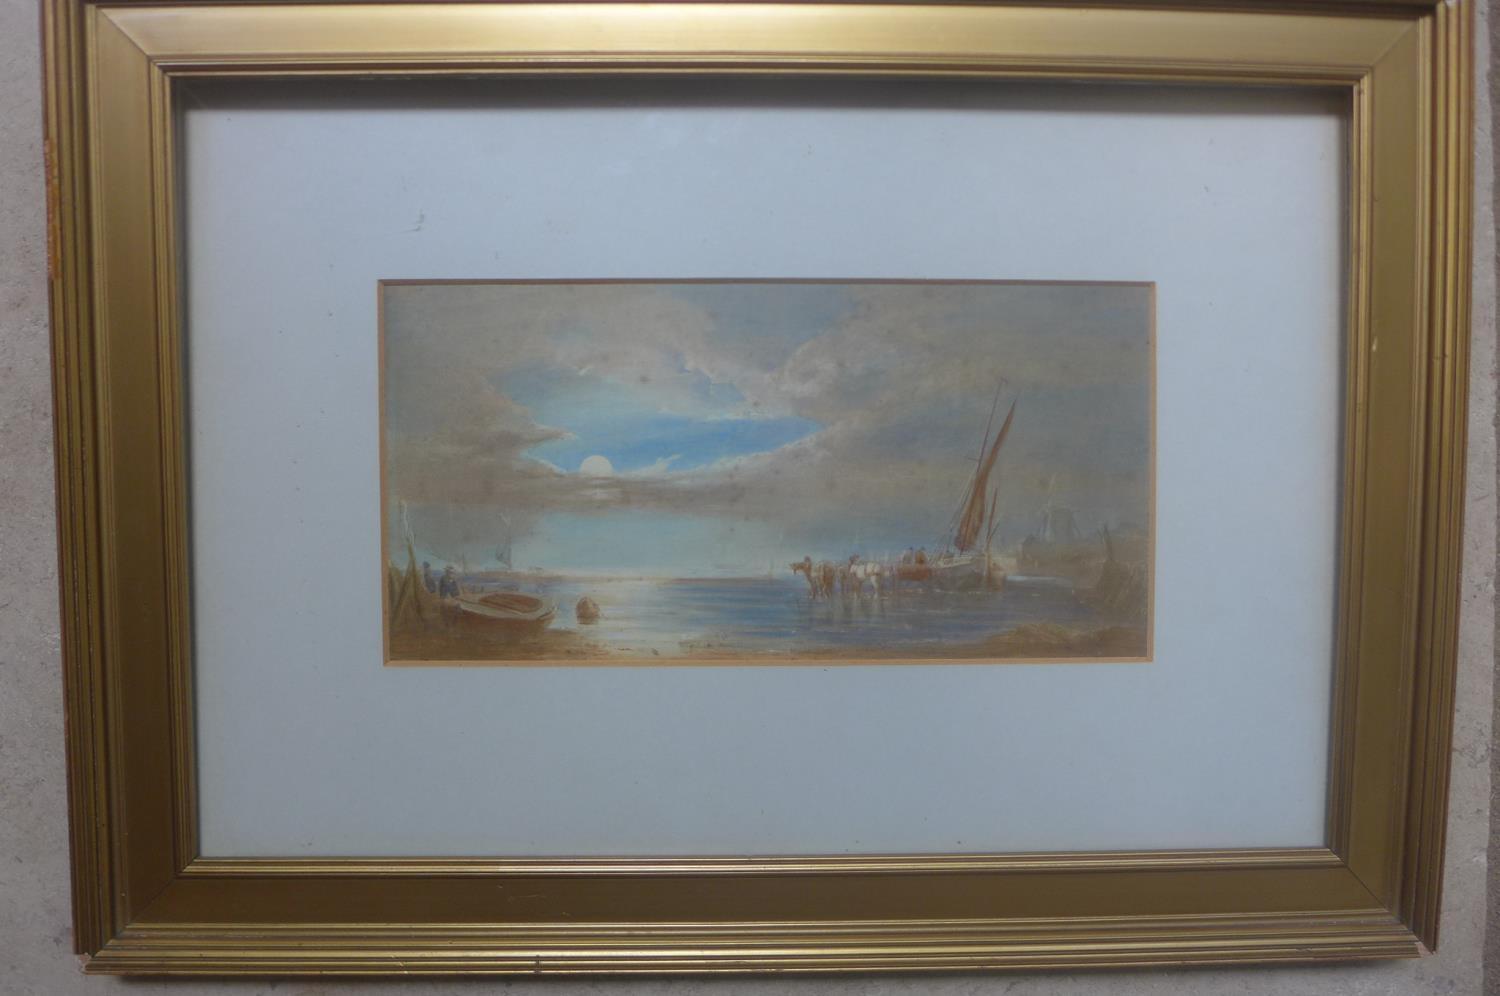 A 19th century watercolour - Moonlight on the Coast - unsigned but purported to be by Clarkson - Image 5 of 6